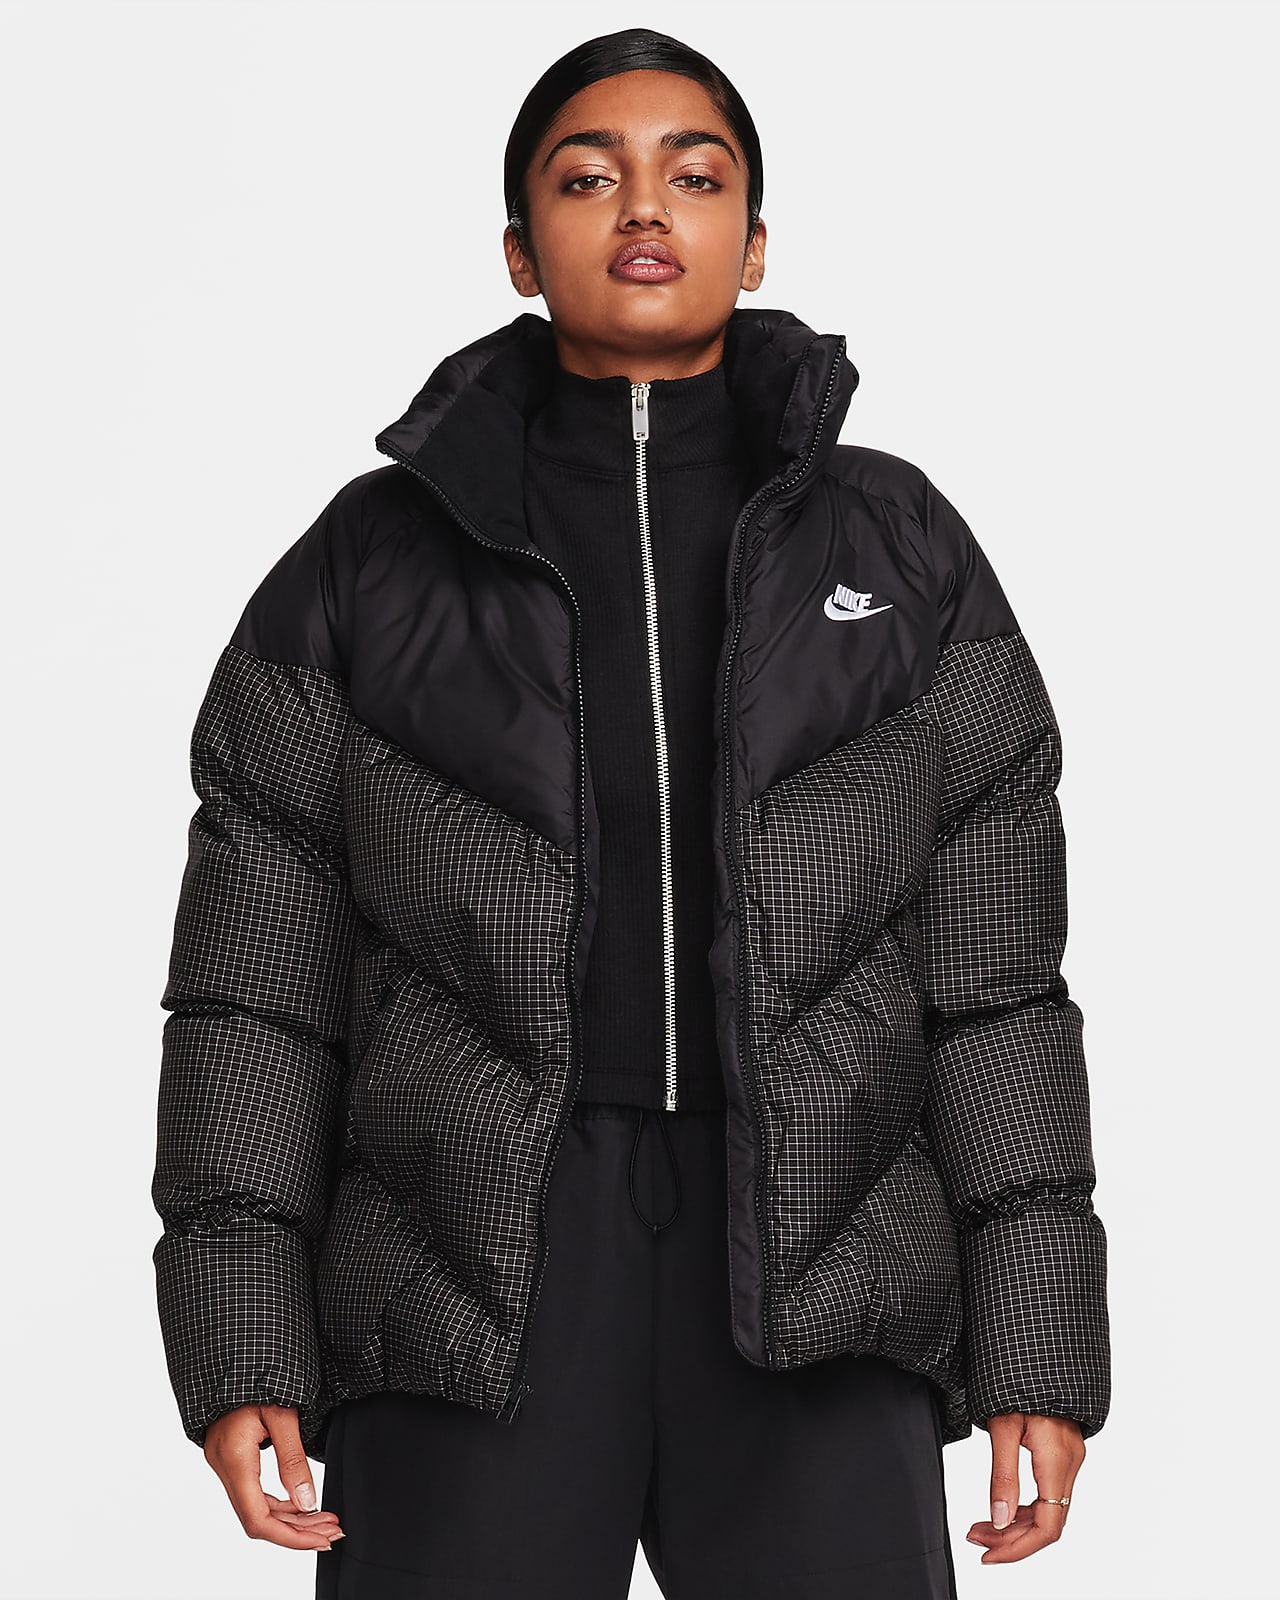 Stay Warm and Stylish with the Women's Nike Puffer Jacket